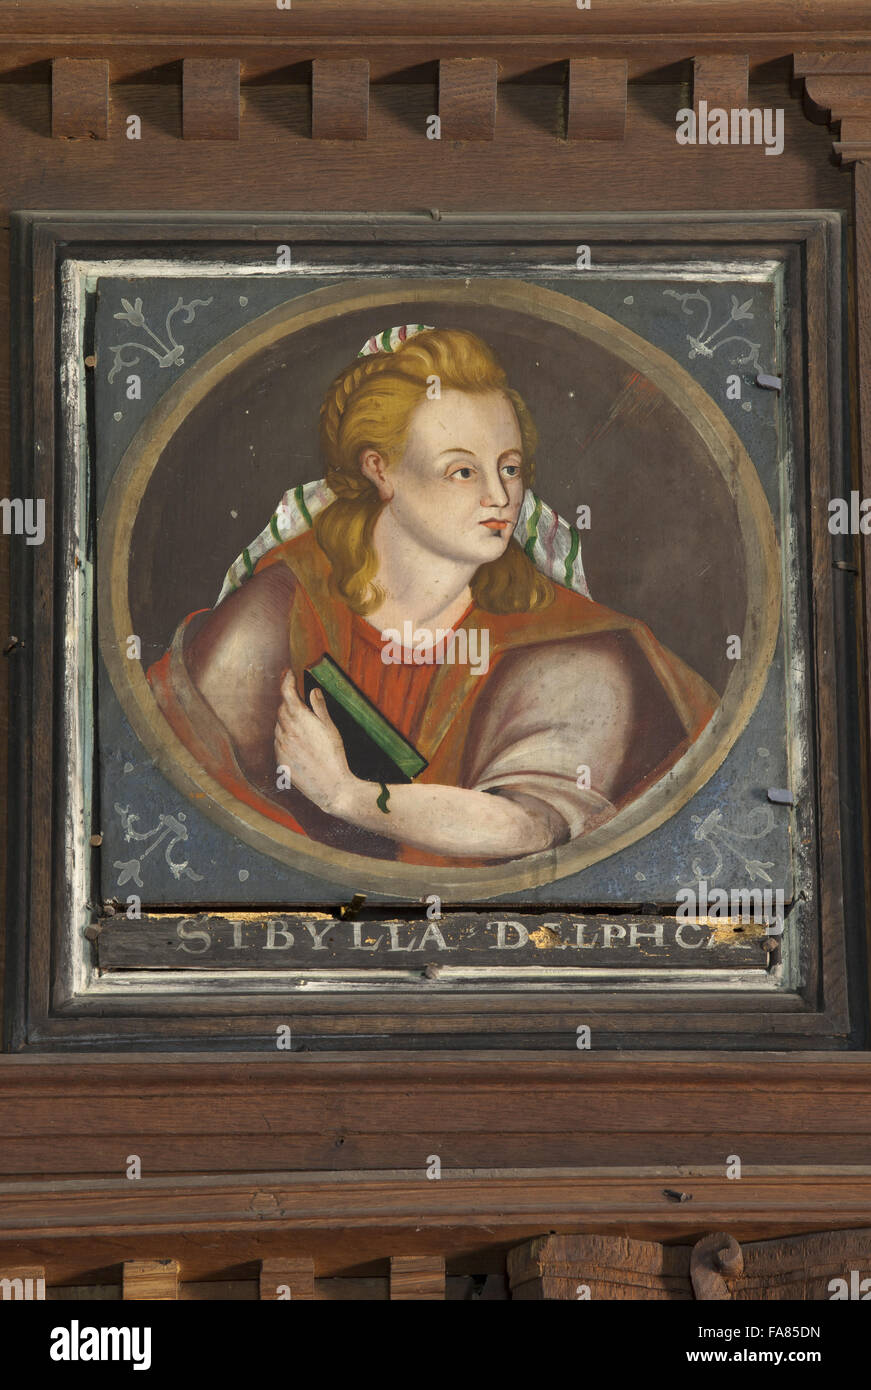 THE DELPHIC SIBYL, British (English) School, oil painting on panel at Chastleton House, Oxfordshire. This painting is one of 24 inset roundels in the frieze of the Great Chamber, which represent the twelve Old Testament prophets and their pagan and female Stock Photo